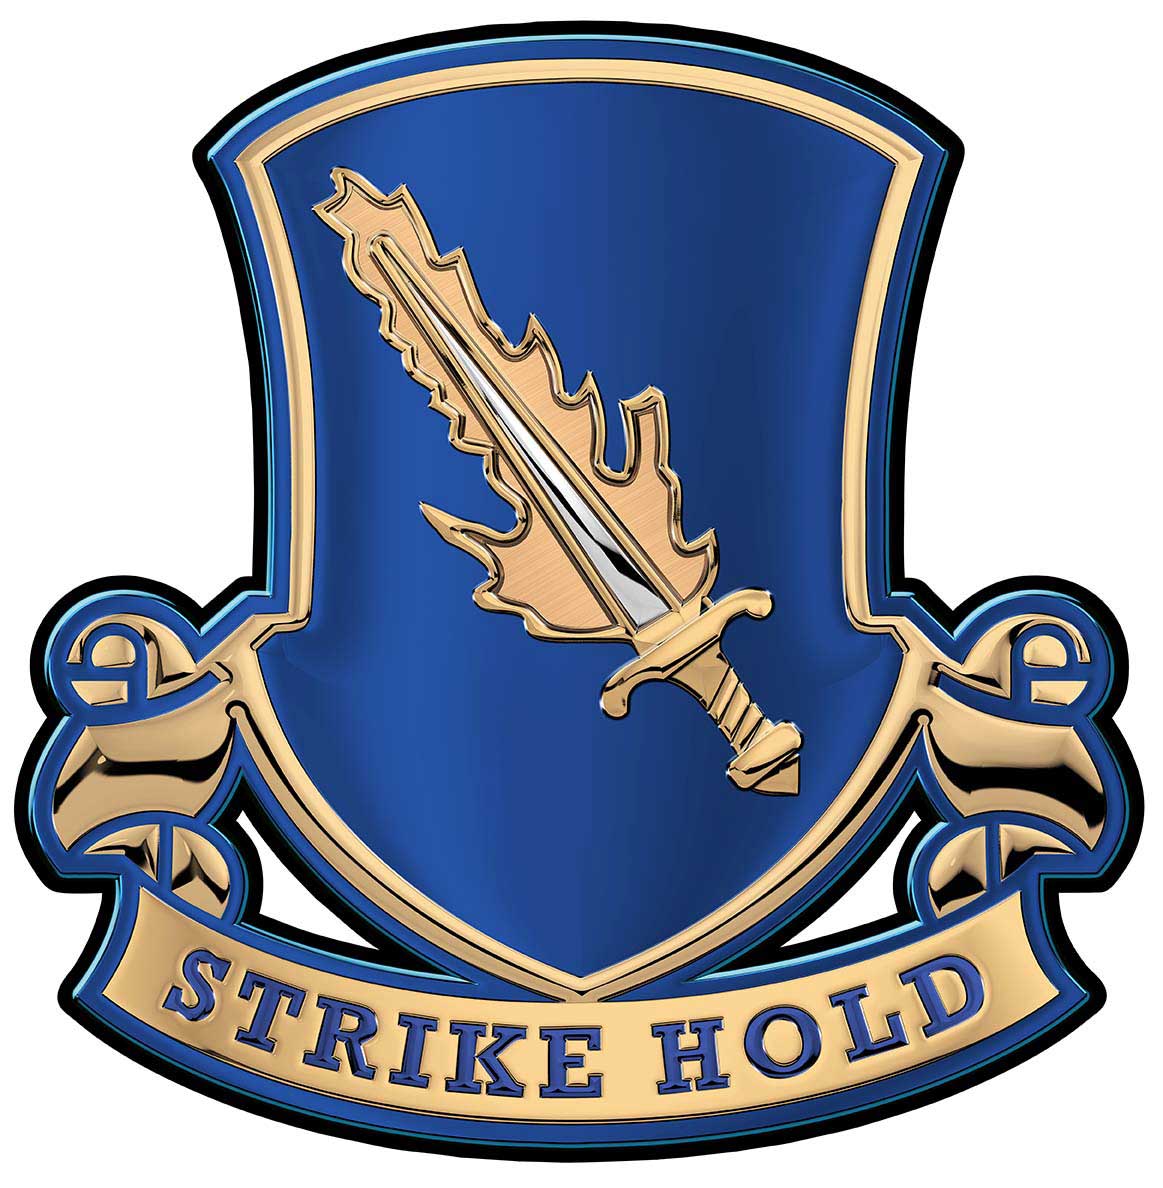 ▷ Indoor Wall Tapestries - 504th Parachute Infantry Regiment - STRIKE HOLD  - CENTRO COMERCIAL CASTELLANA 200 ◁